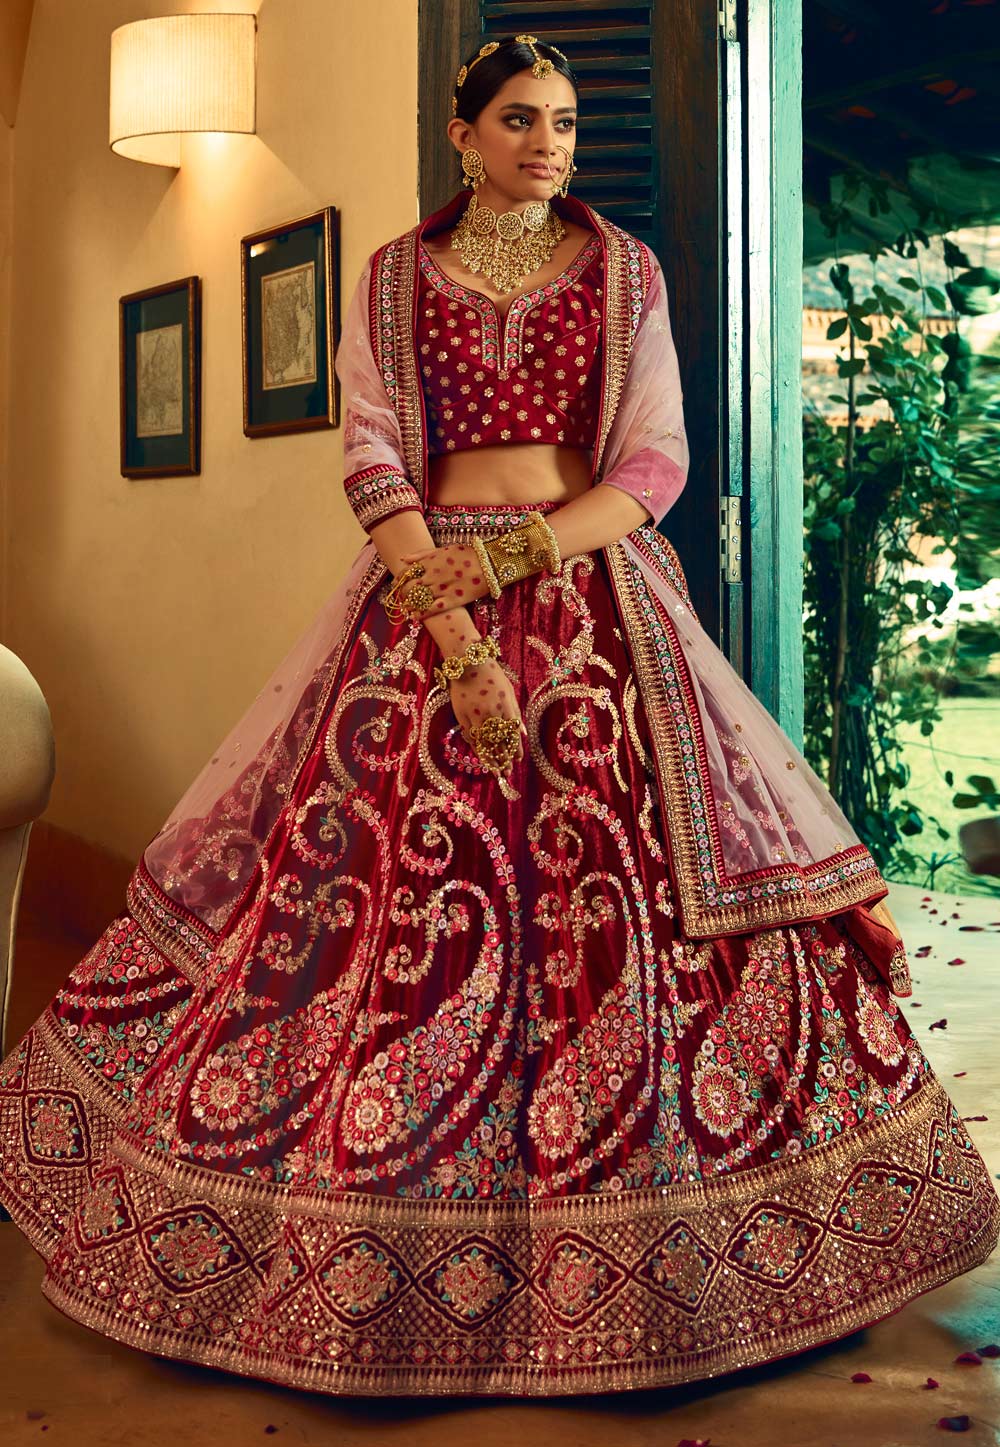 What is the place to buy bridal lehenga? - Quora